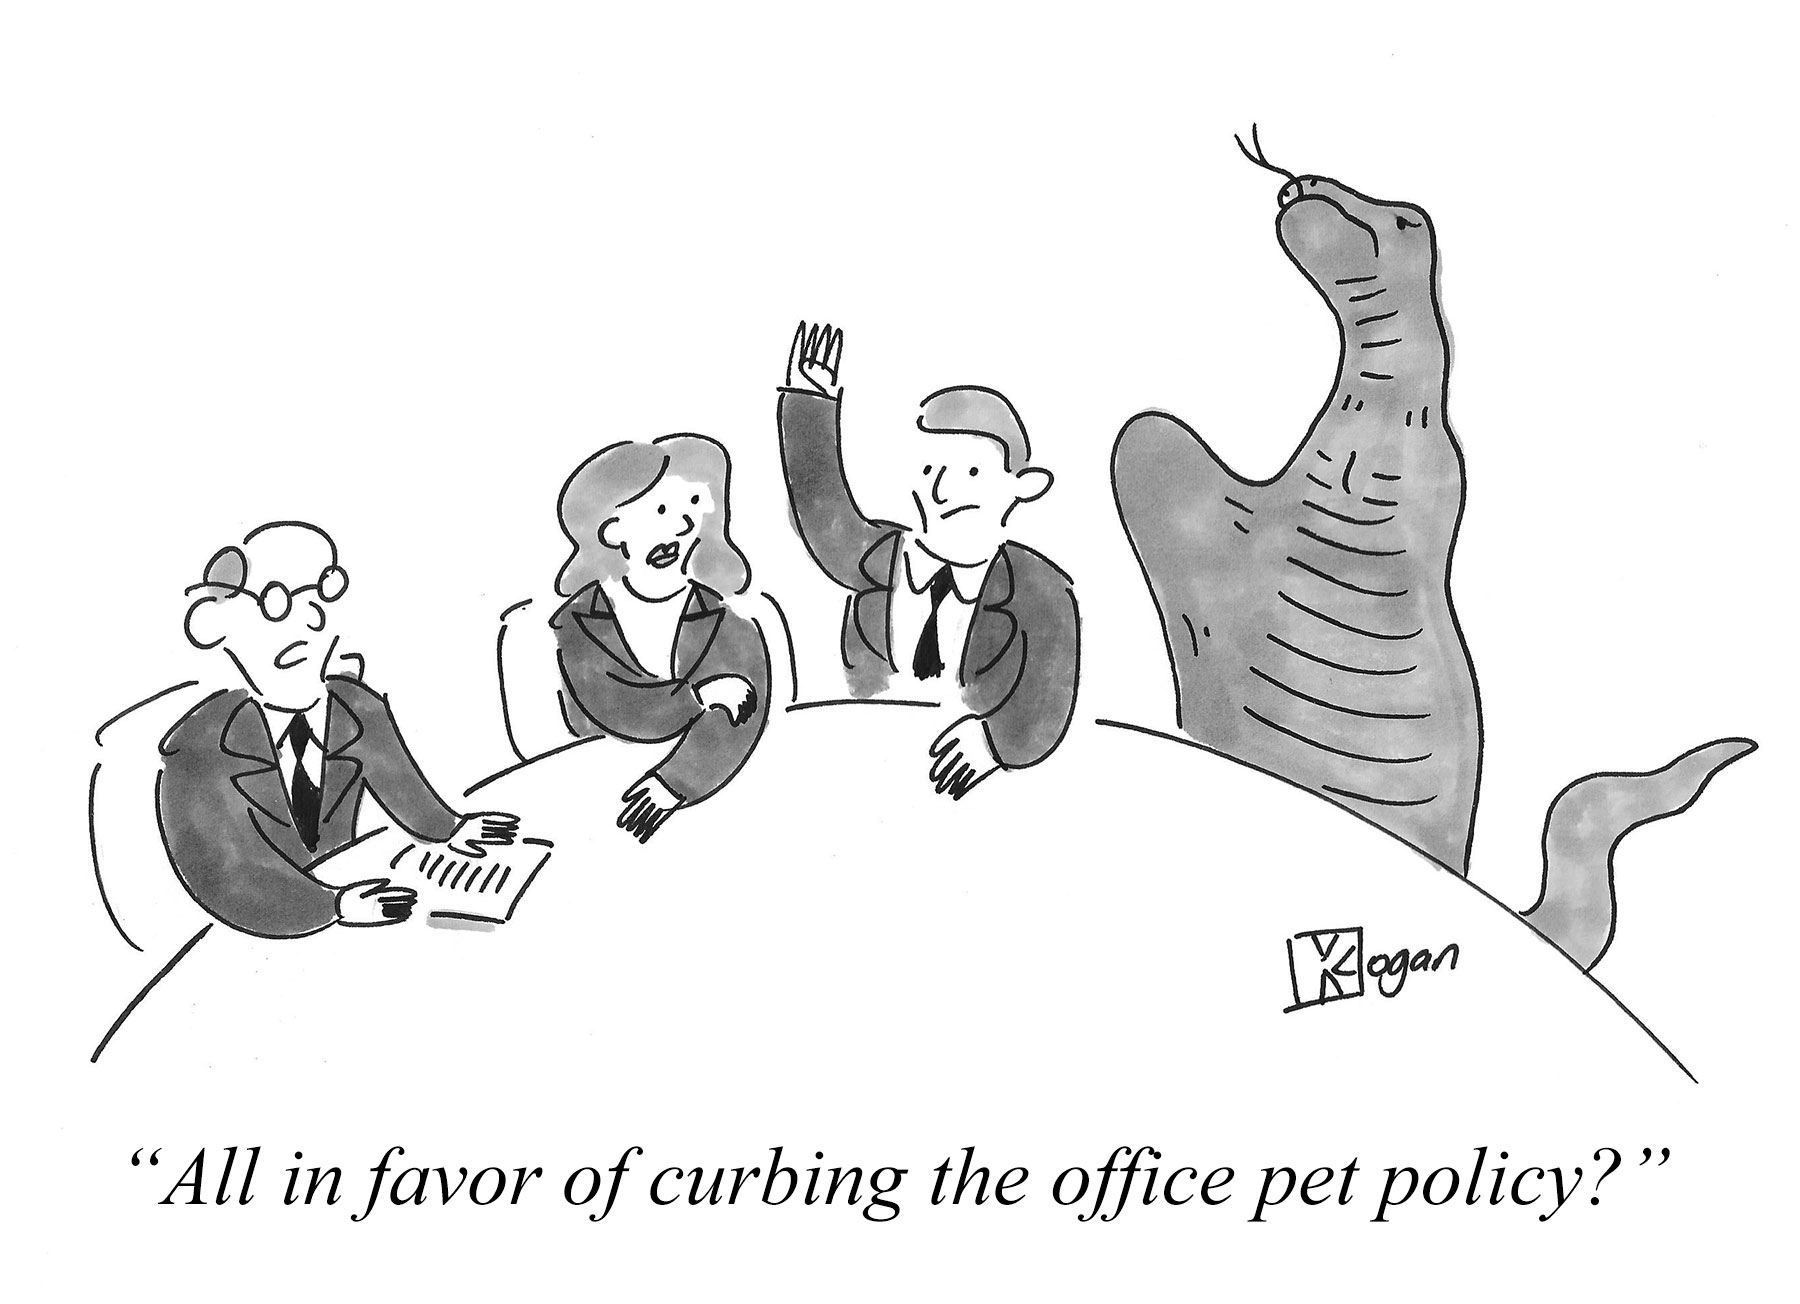 All in favor of curbing the office pet policy?